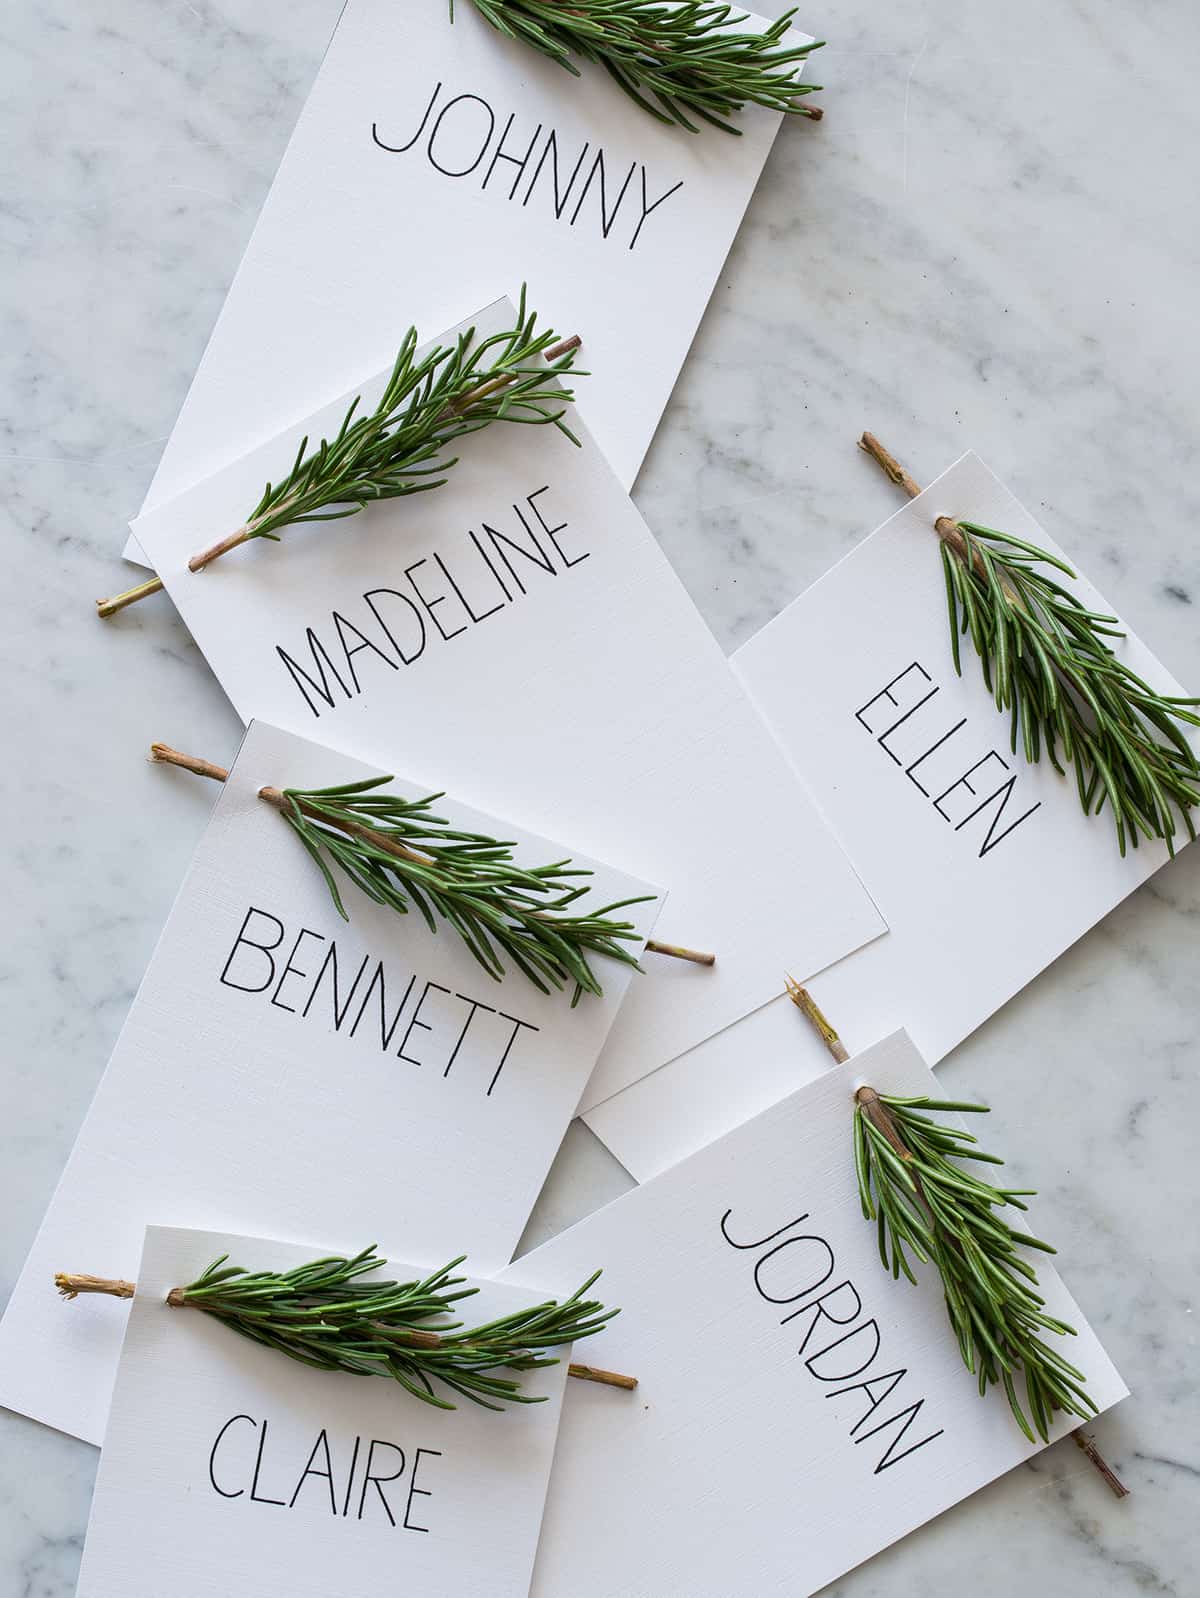 rosemary-sprig-place-cards-diy-place-cards-spoon-fork-bacon